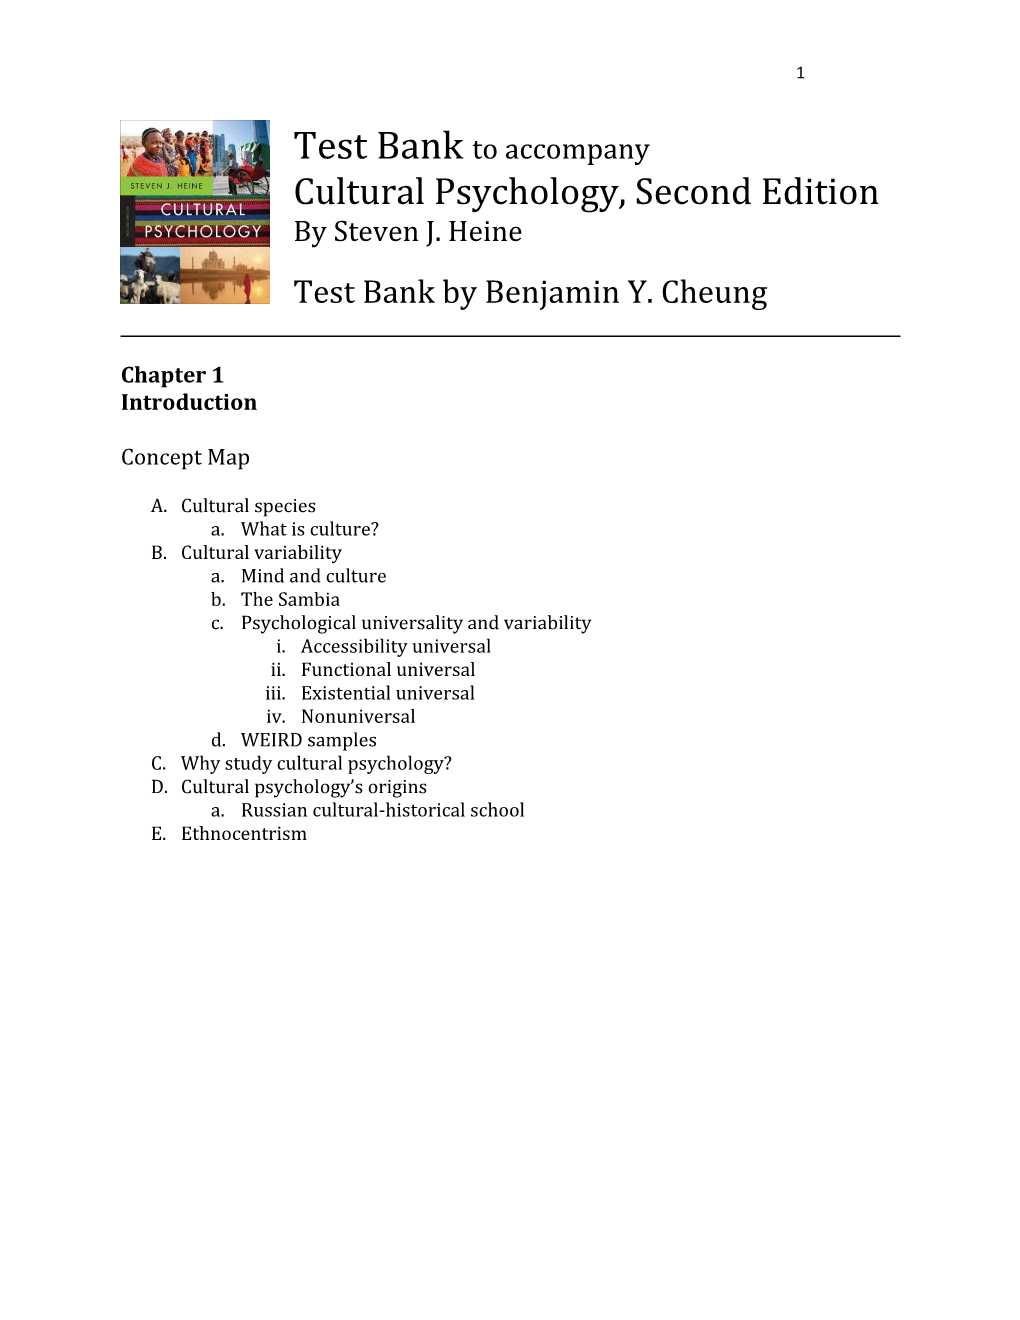 Cultural Psychology, Second Edition